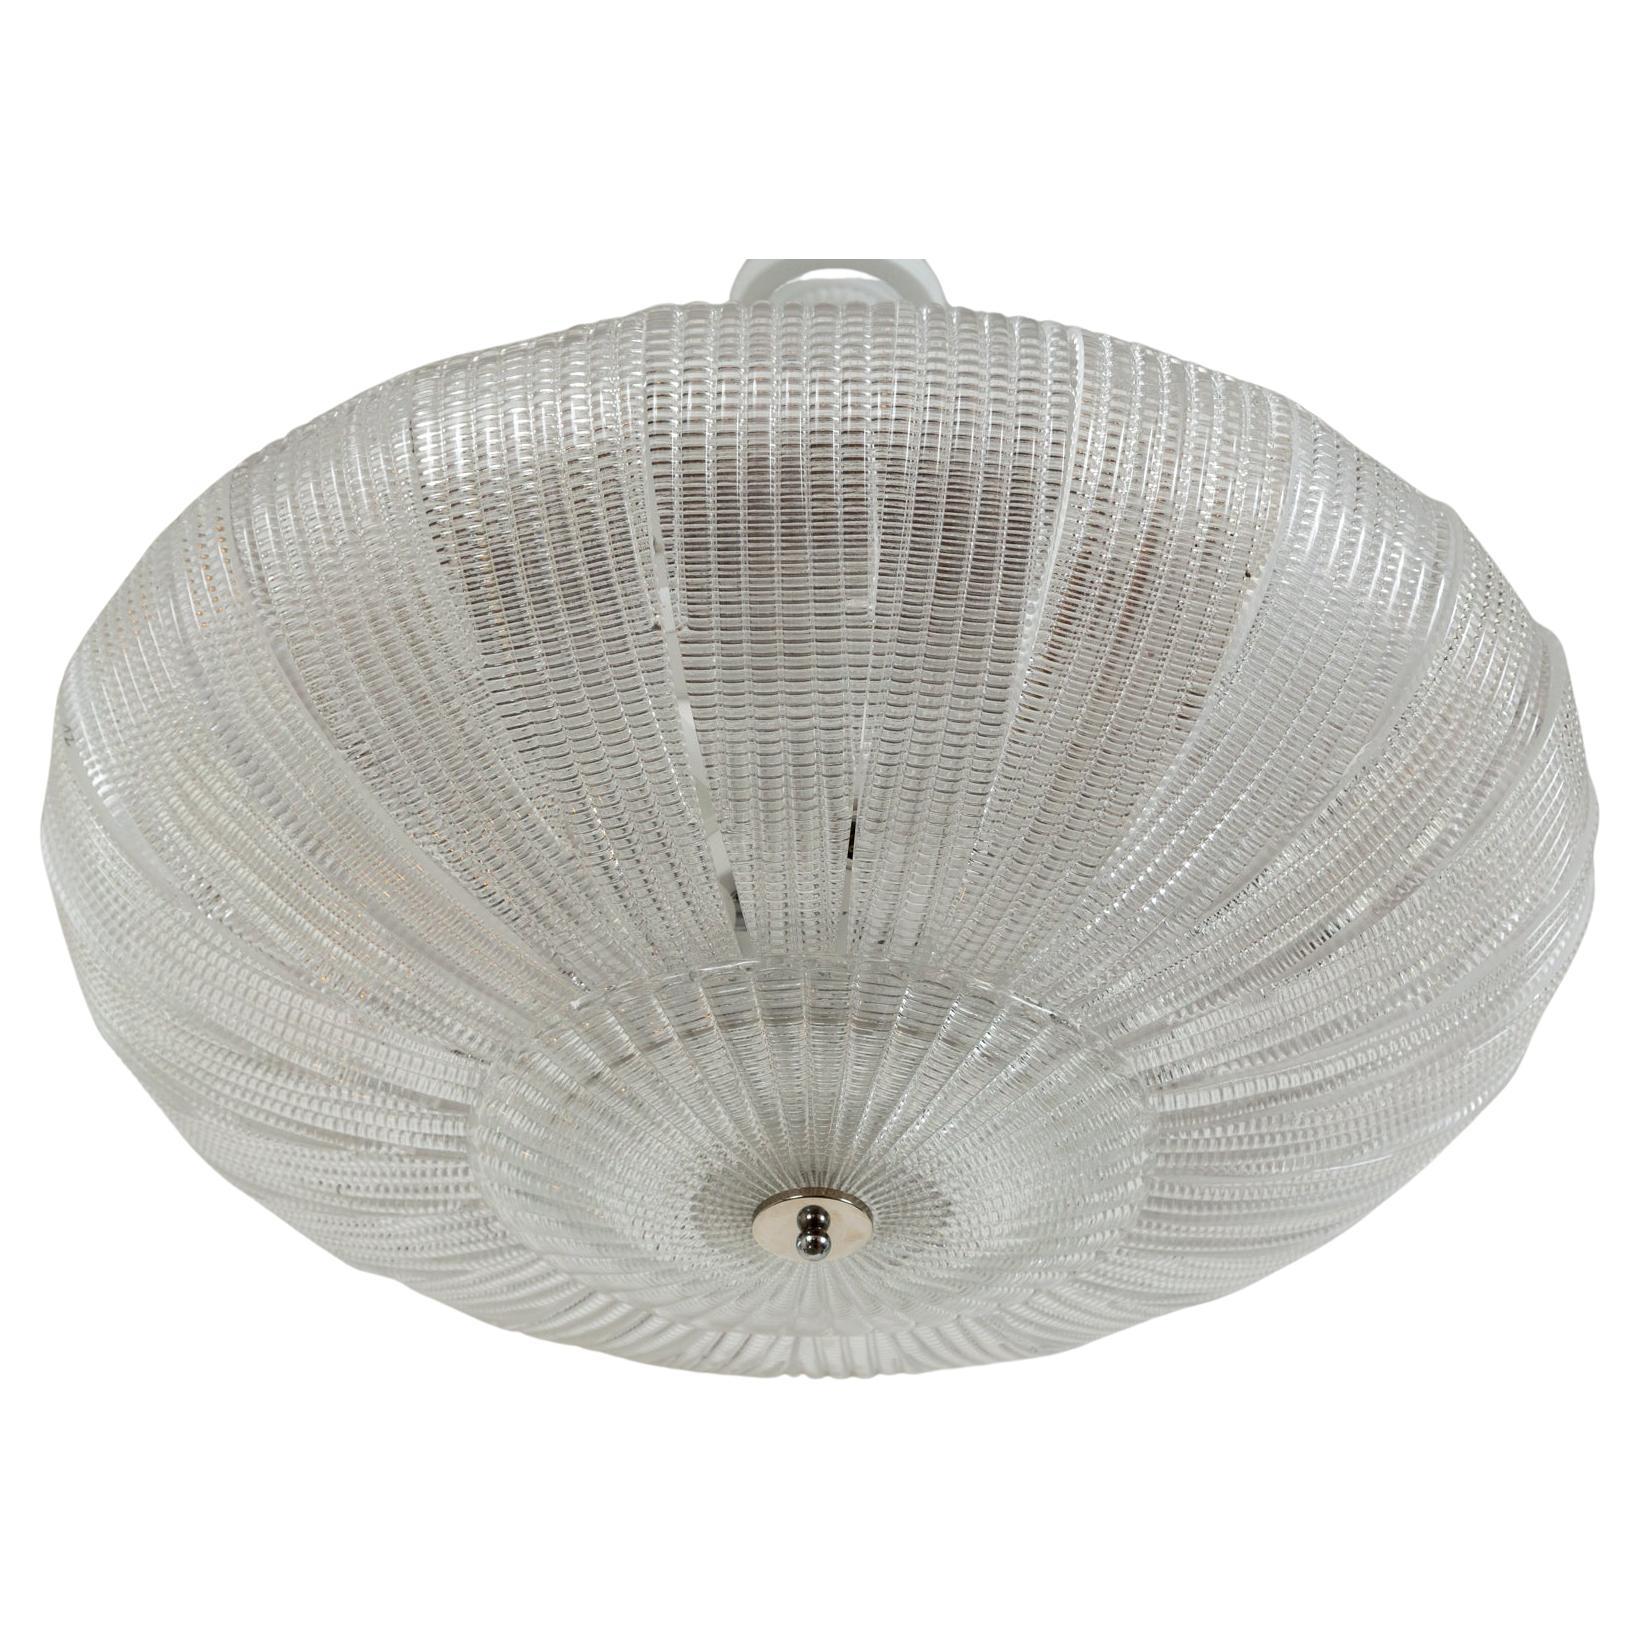 Modern Dome-Shaped Glass Ceiling Fixture, Contemporary